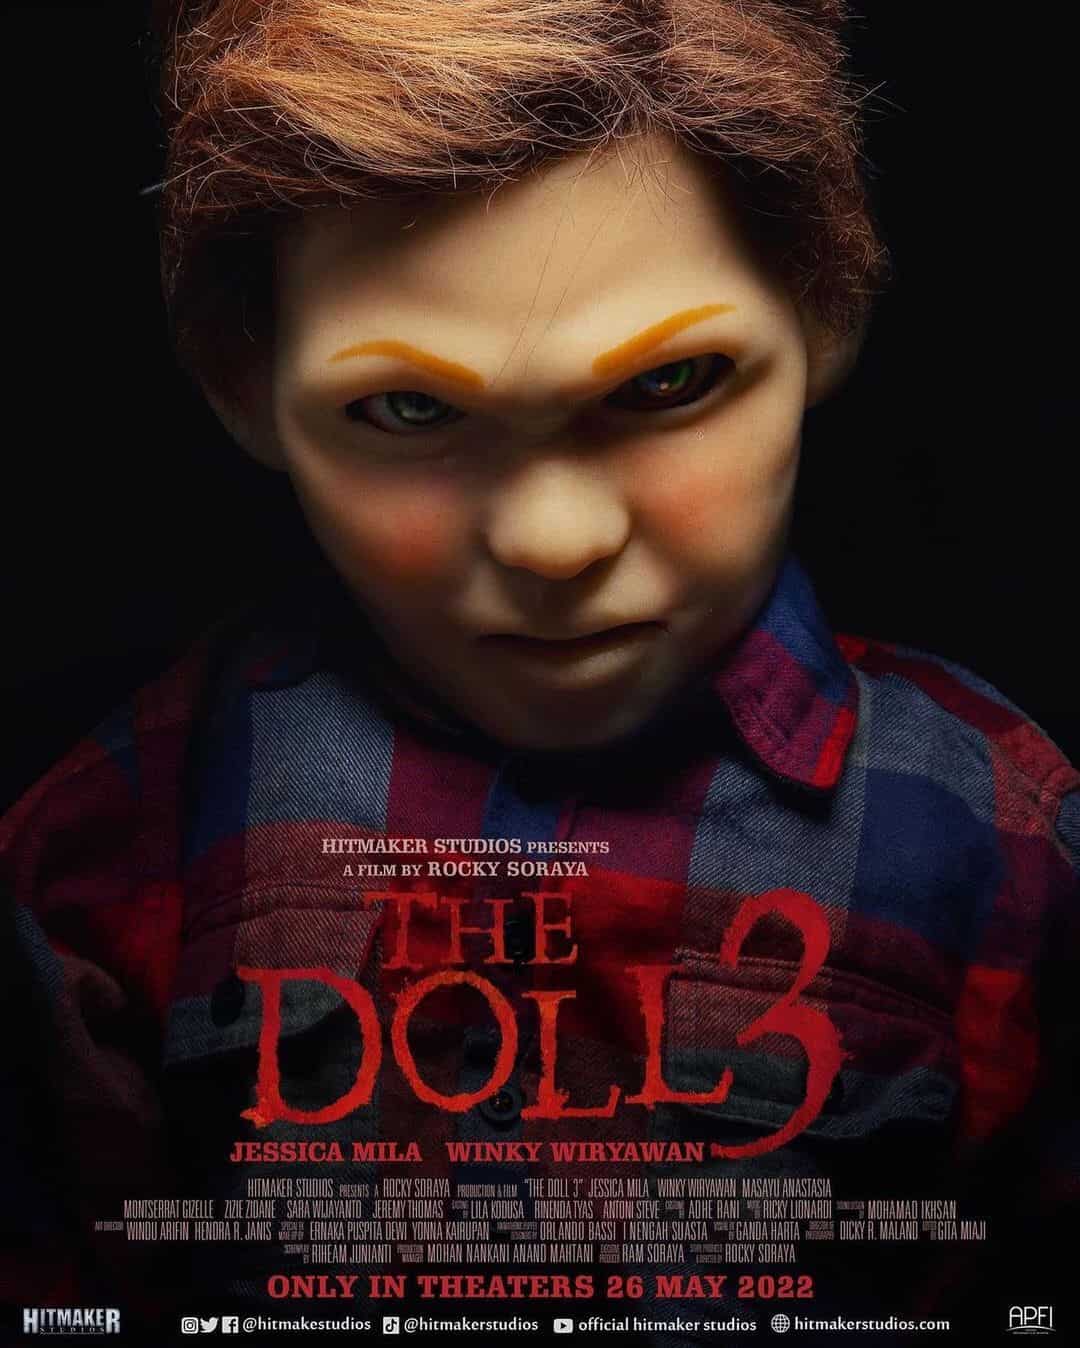 The Doll 3 - Sinopsis, Pemain, OST, Review